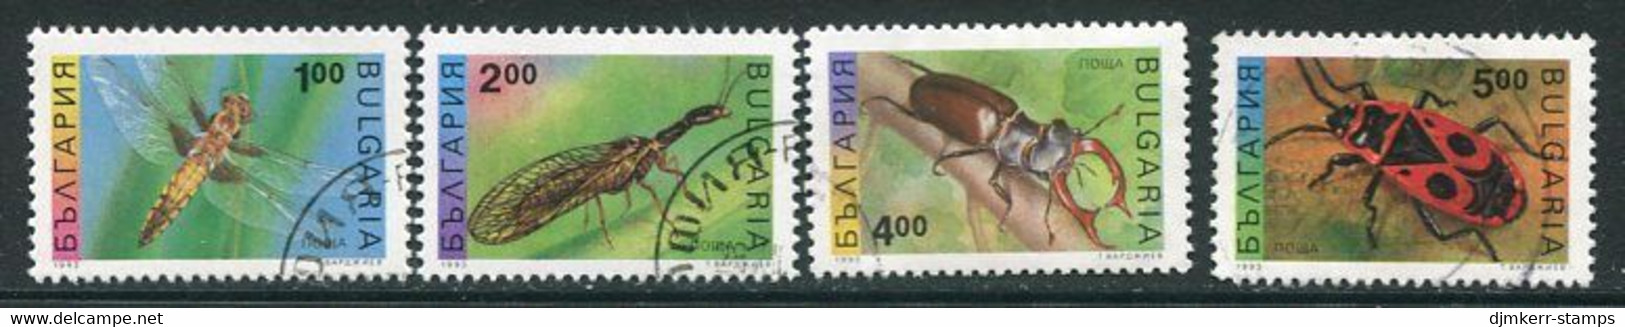 BULGARIA  1993 Defibitive: Insects Used.  Michel 4093-96 - Usati